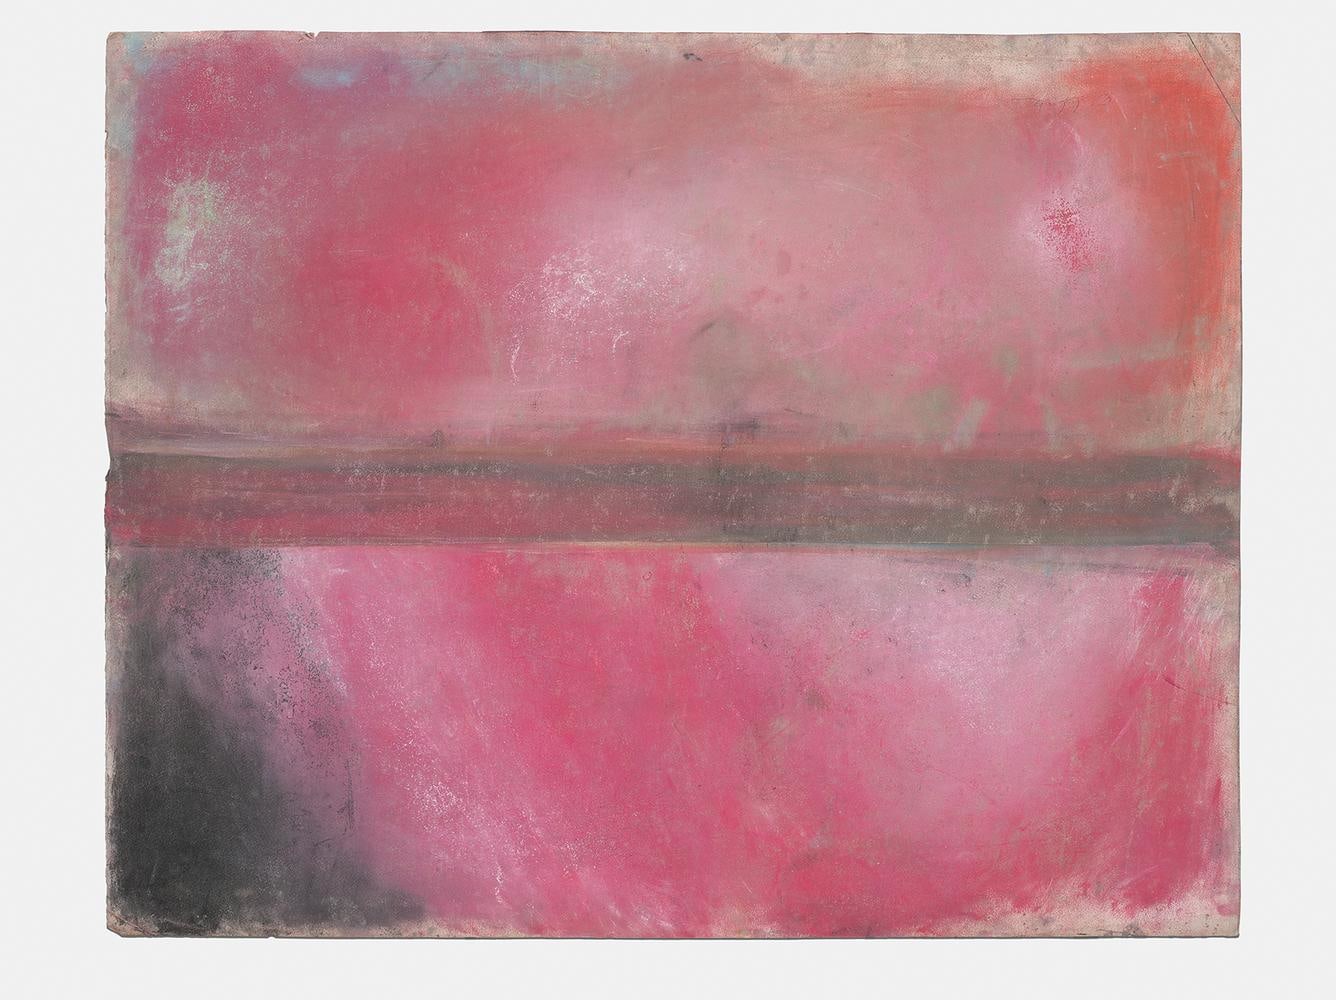 Ed Clark Untitled 2013 dry pigment on paper 37 5/8 x 47 3/4 inches (95.6 x 121.3 cm)